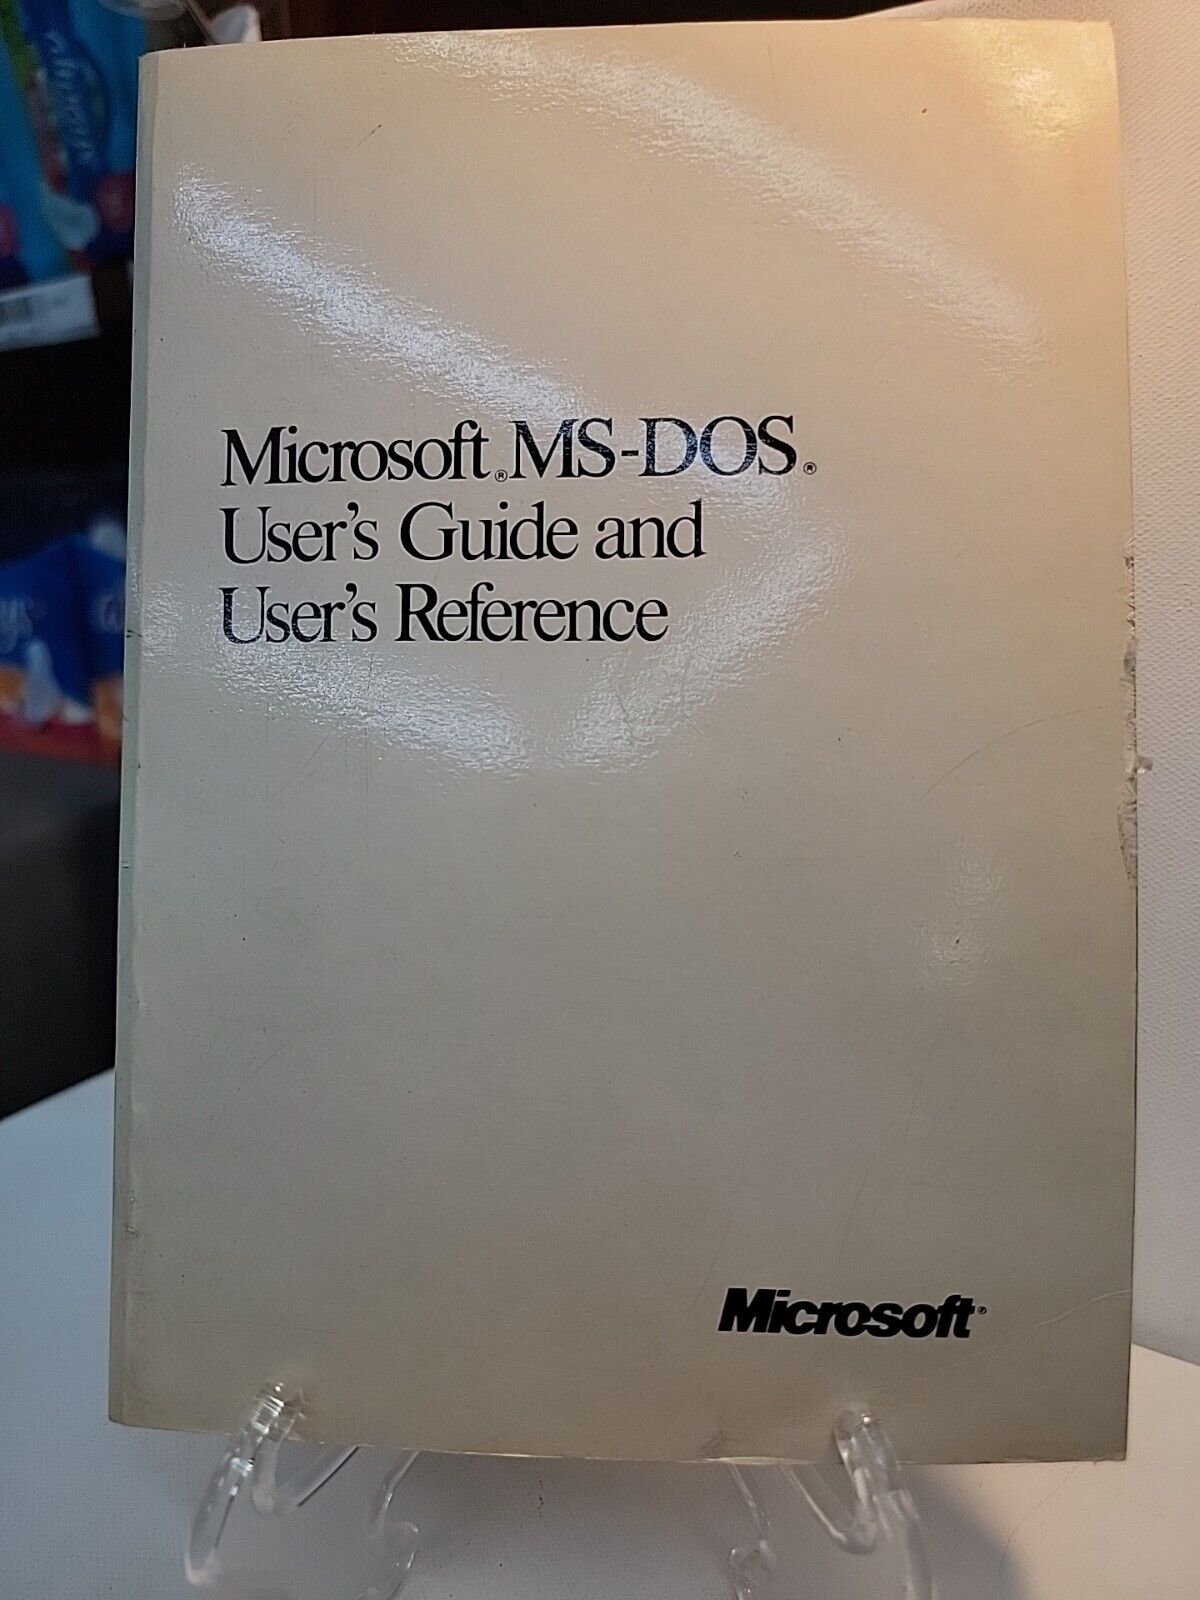 Microsoft MS-DOS User's Guide and User's Reference Version 4.0 Copyright '87-'88